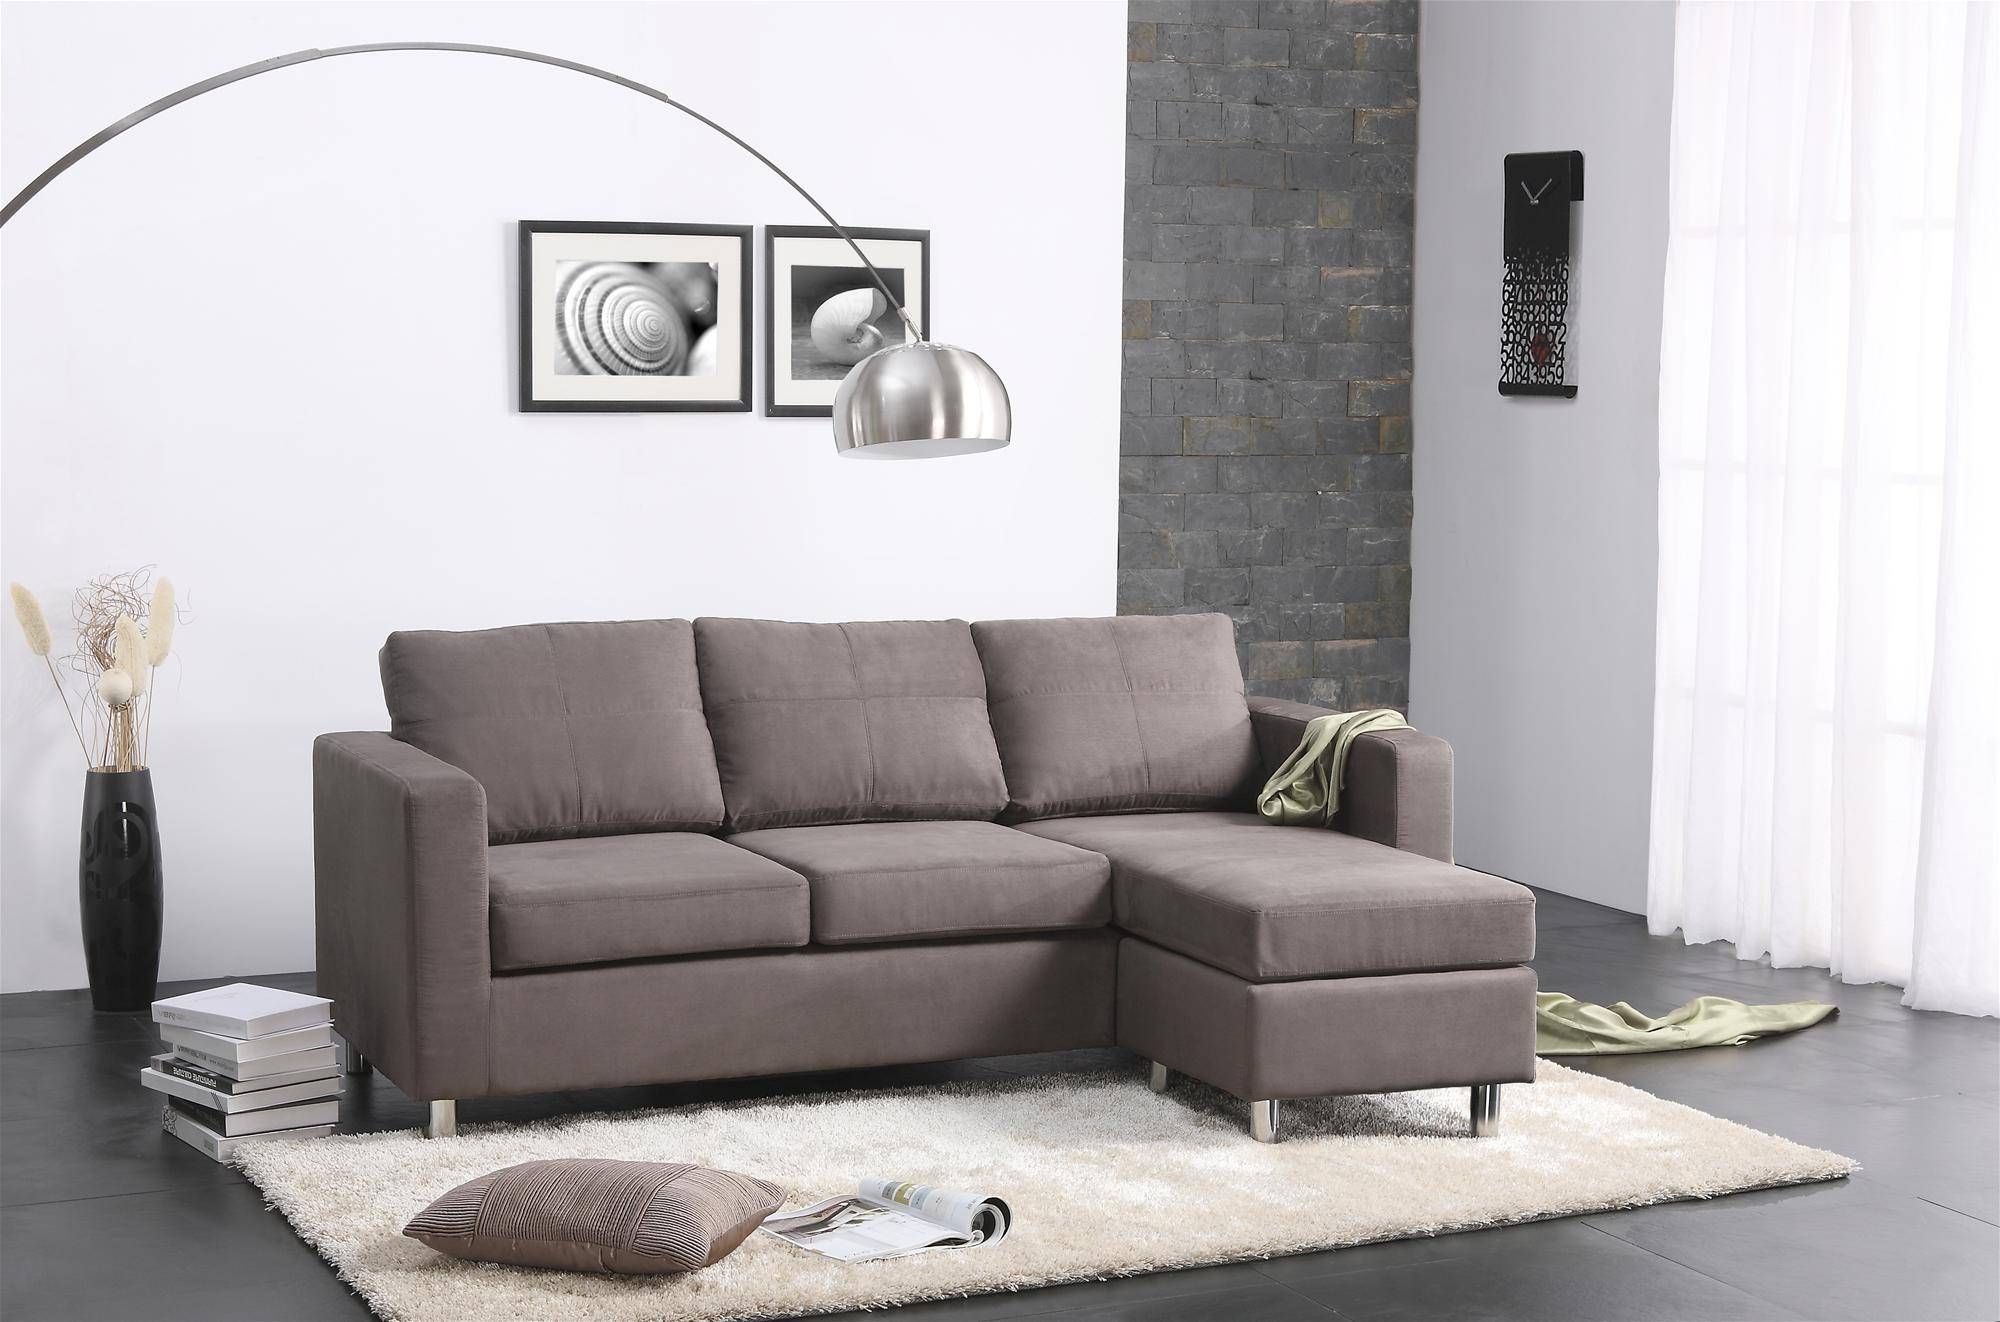 Interesting Walmart Sectional Sofas 64 On Contemporary Black Inside Contemporary Black Leather Sectional Sofa Left Side Chaise (View 16 of 30)